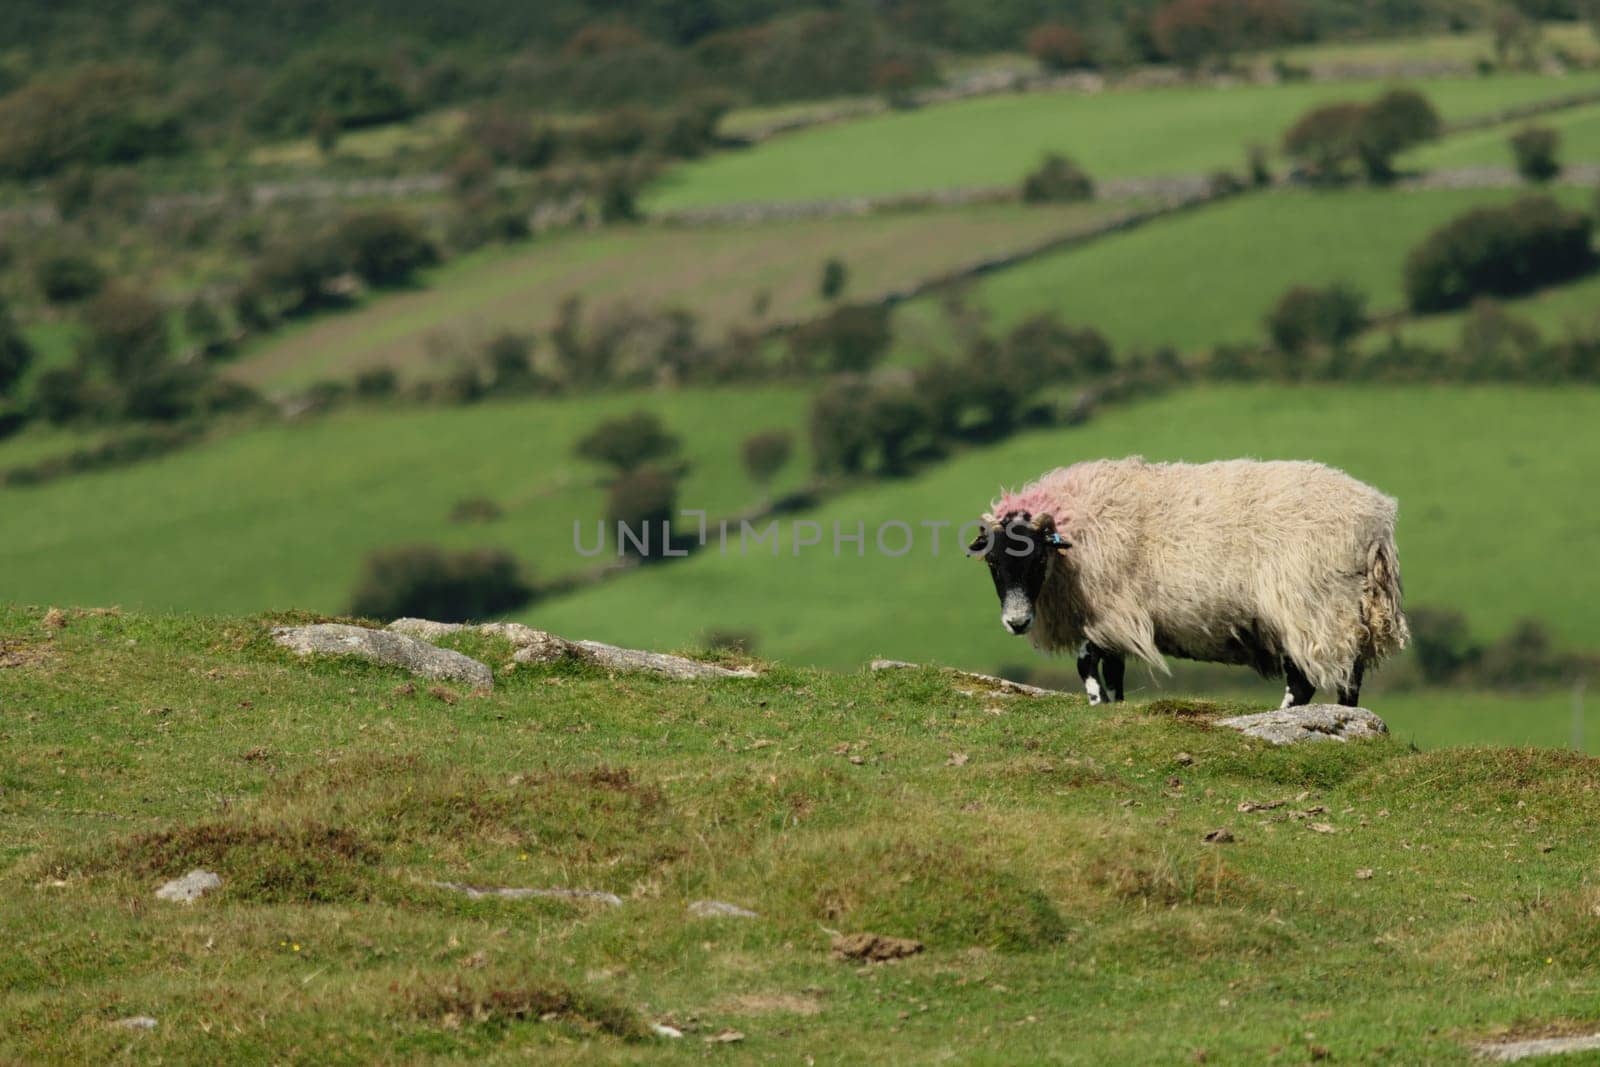 A sheep standing on a grassy hill with a scenic view of green fields and trees in the background.